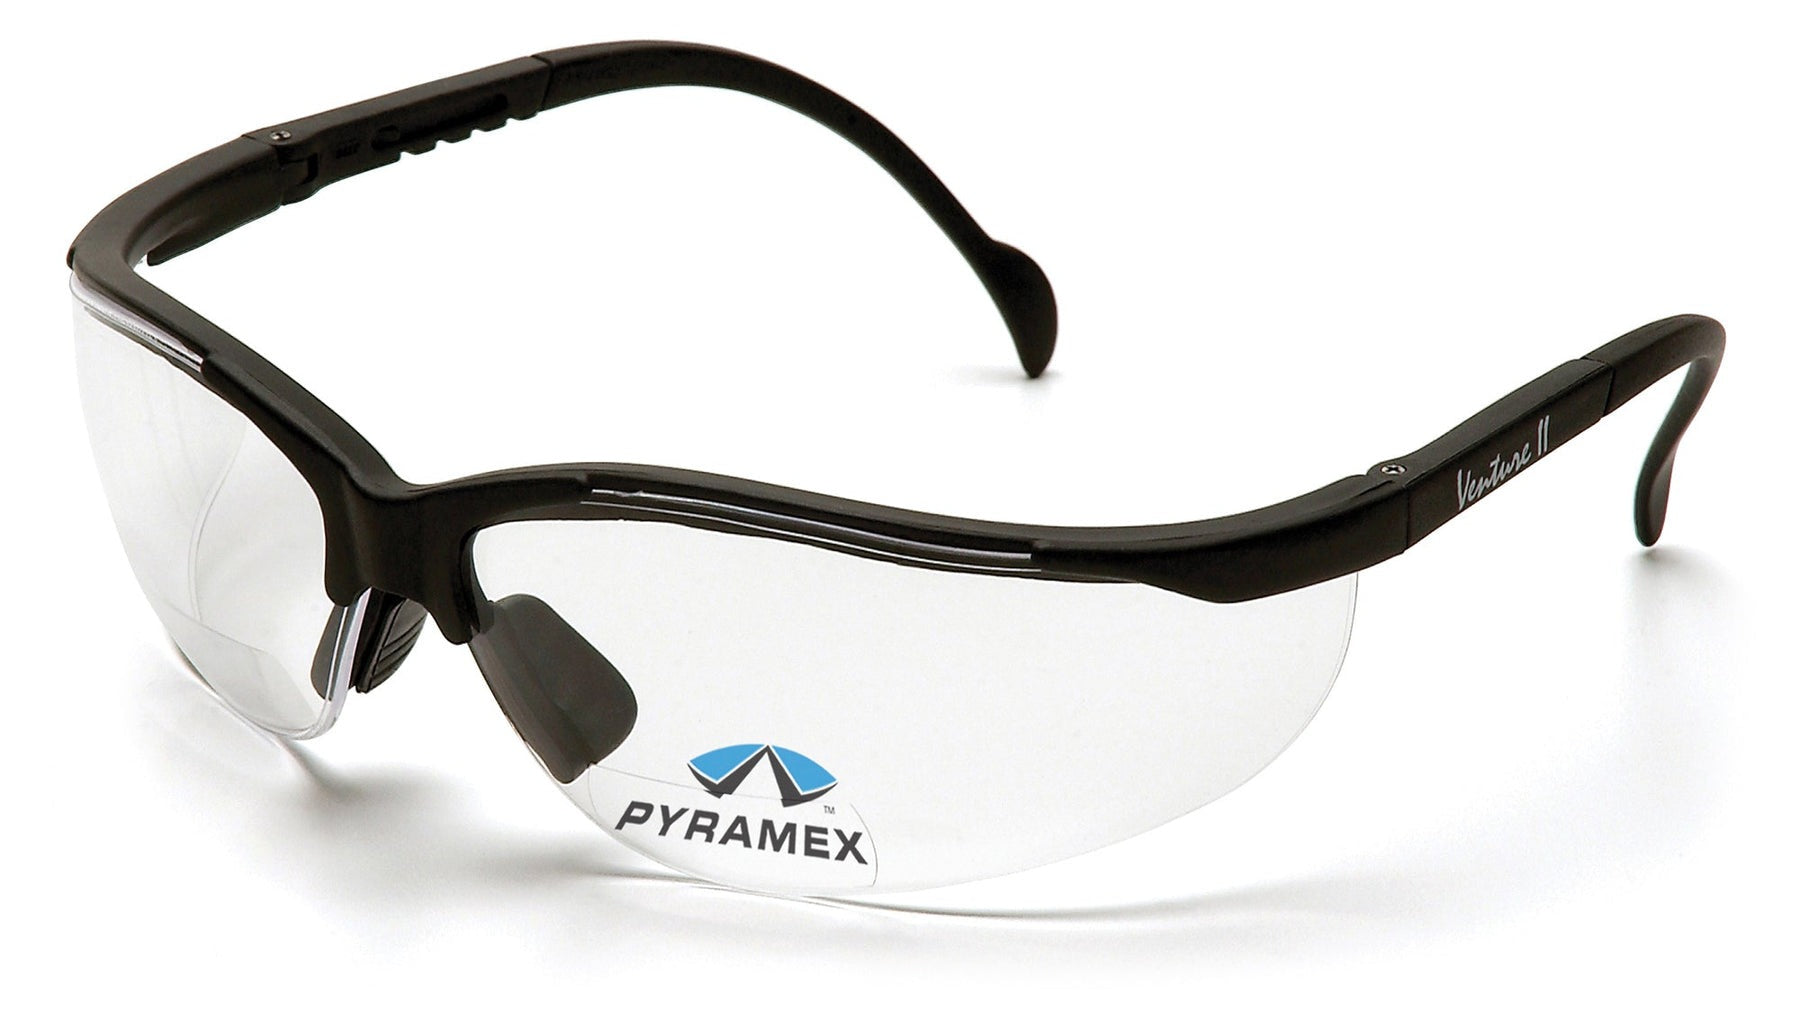 Pyramex Venture II reader RX prescription clear safety work spectacle